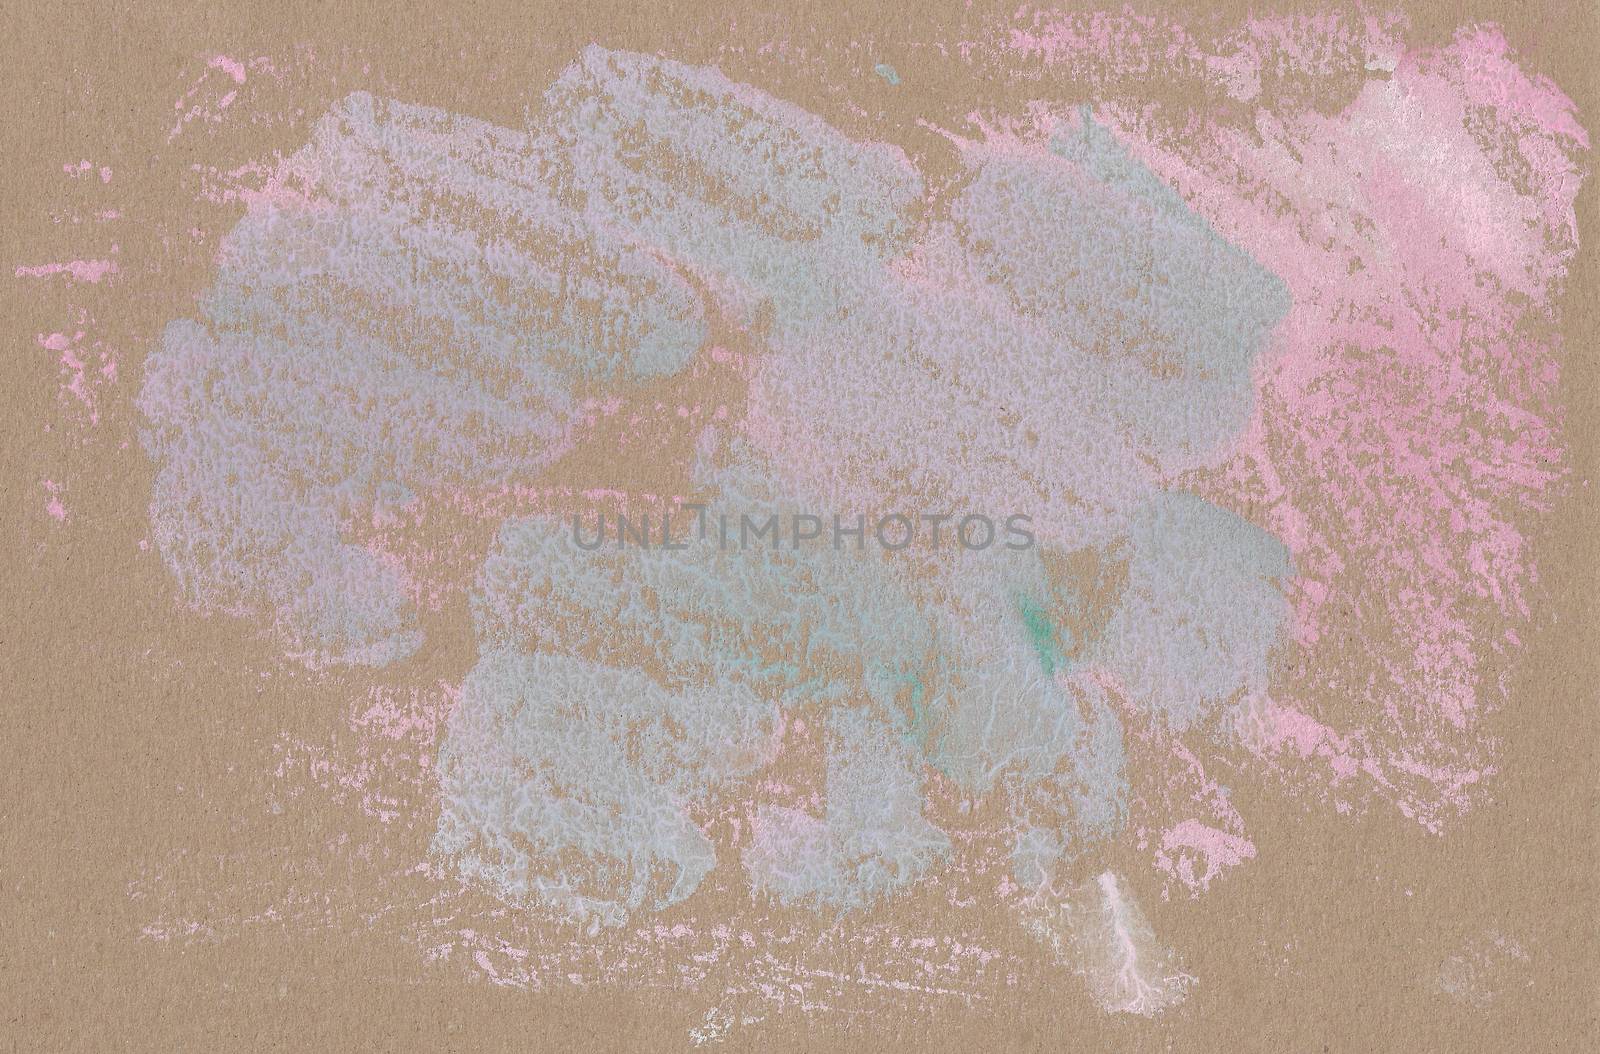 Hand-drawn texture, monotype. Stains of pink and light green paint on brown craft paper. Textured background, collage material for designs, titles, price tags, flyers, wallpapers, covers and packaging